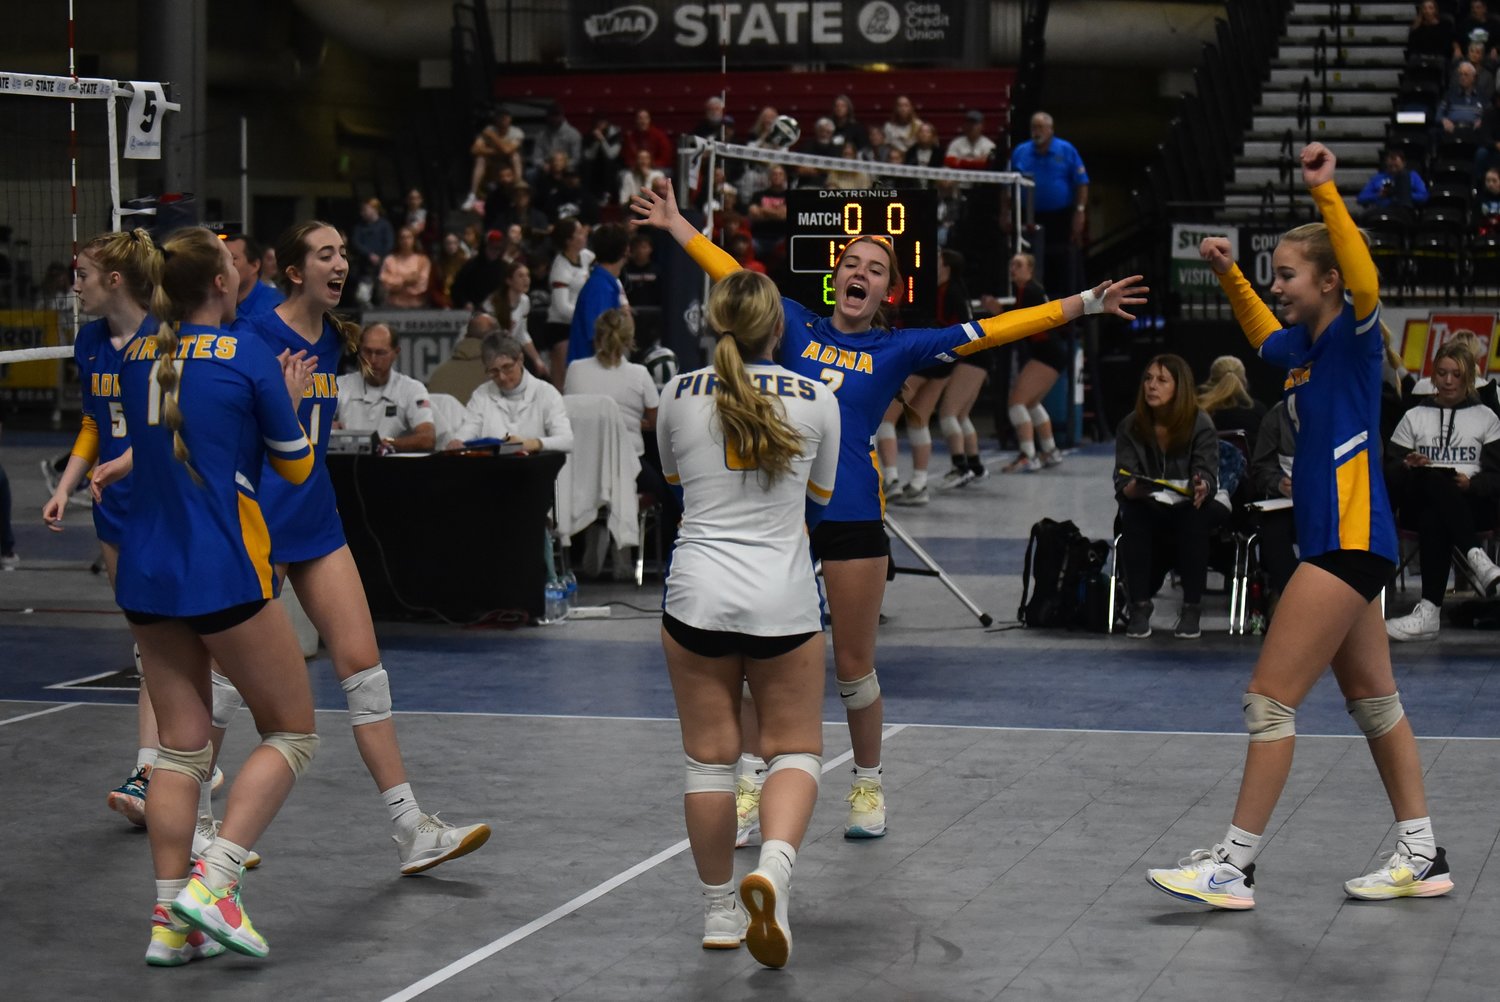 Adna celebrates a point during its four-set win over Toutle Lake in a loser-out match to keep its season alive in the 2B state tournament, in Yakima on Nov. 11.